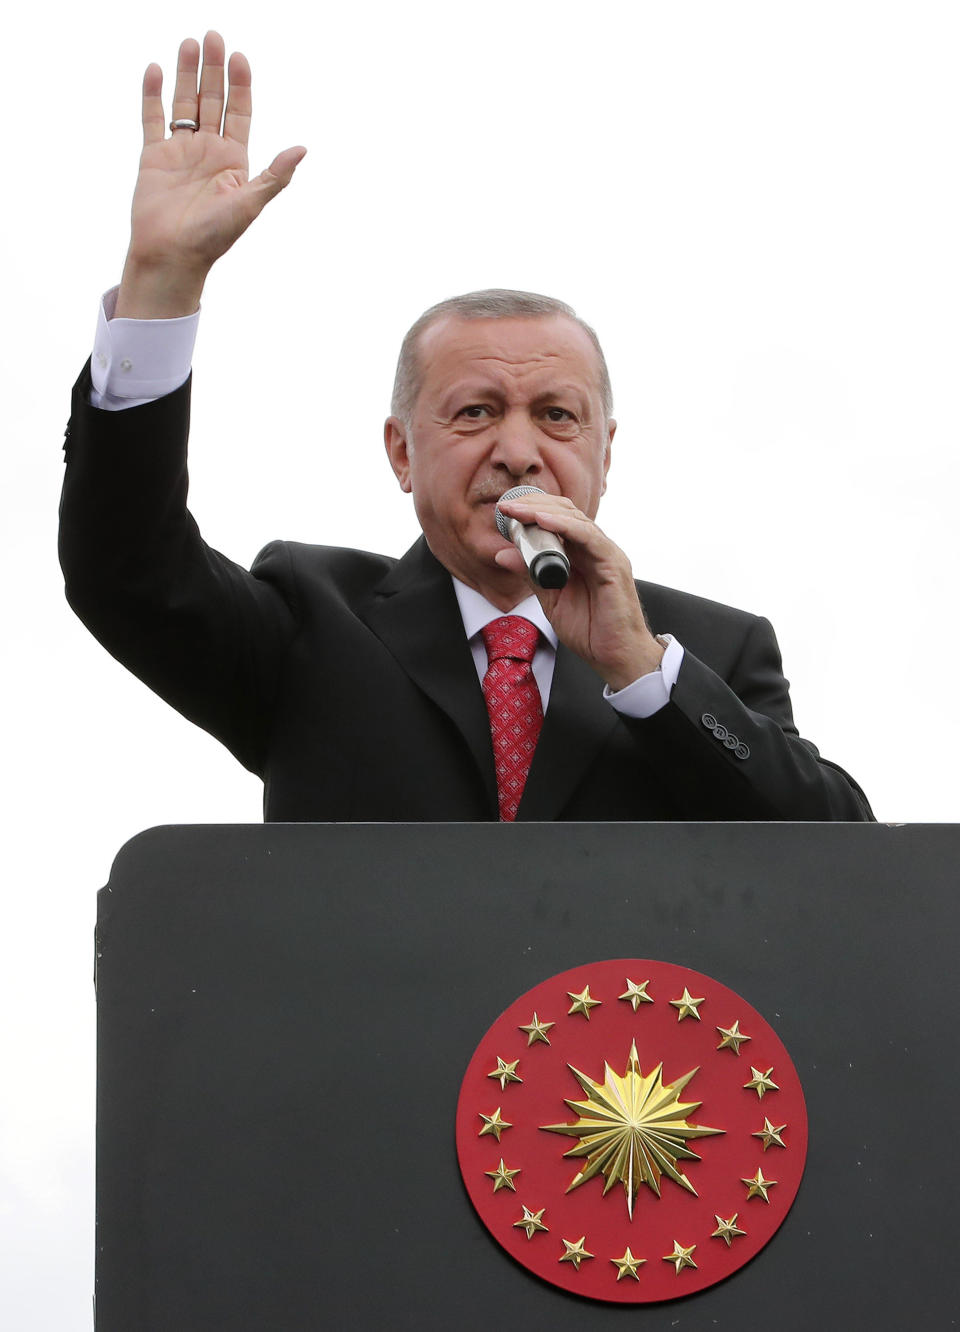 Turkey's President Recep Tayyip Erdogan, gestures as he talks during a campaign rally in Istanbul for the June 23 re-run of Istanbul elections, Wednesday, June 19, 2019. Erdogan has claimed that former Egyptian President Mohammed Morsi did not die of natural causes but that he was killed. At the campaign speech Erdogan offered as evidence the fact that the deposed president allegedly "flailed" in court for 20 minutes and that nobody assisted him. (Presidential Press Service via AP, Pool)